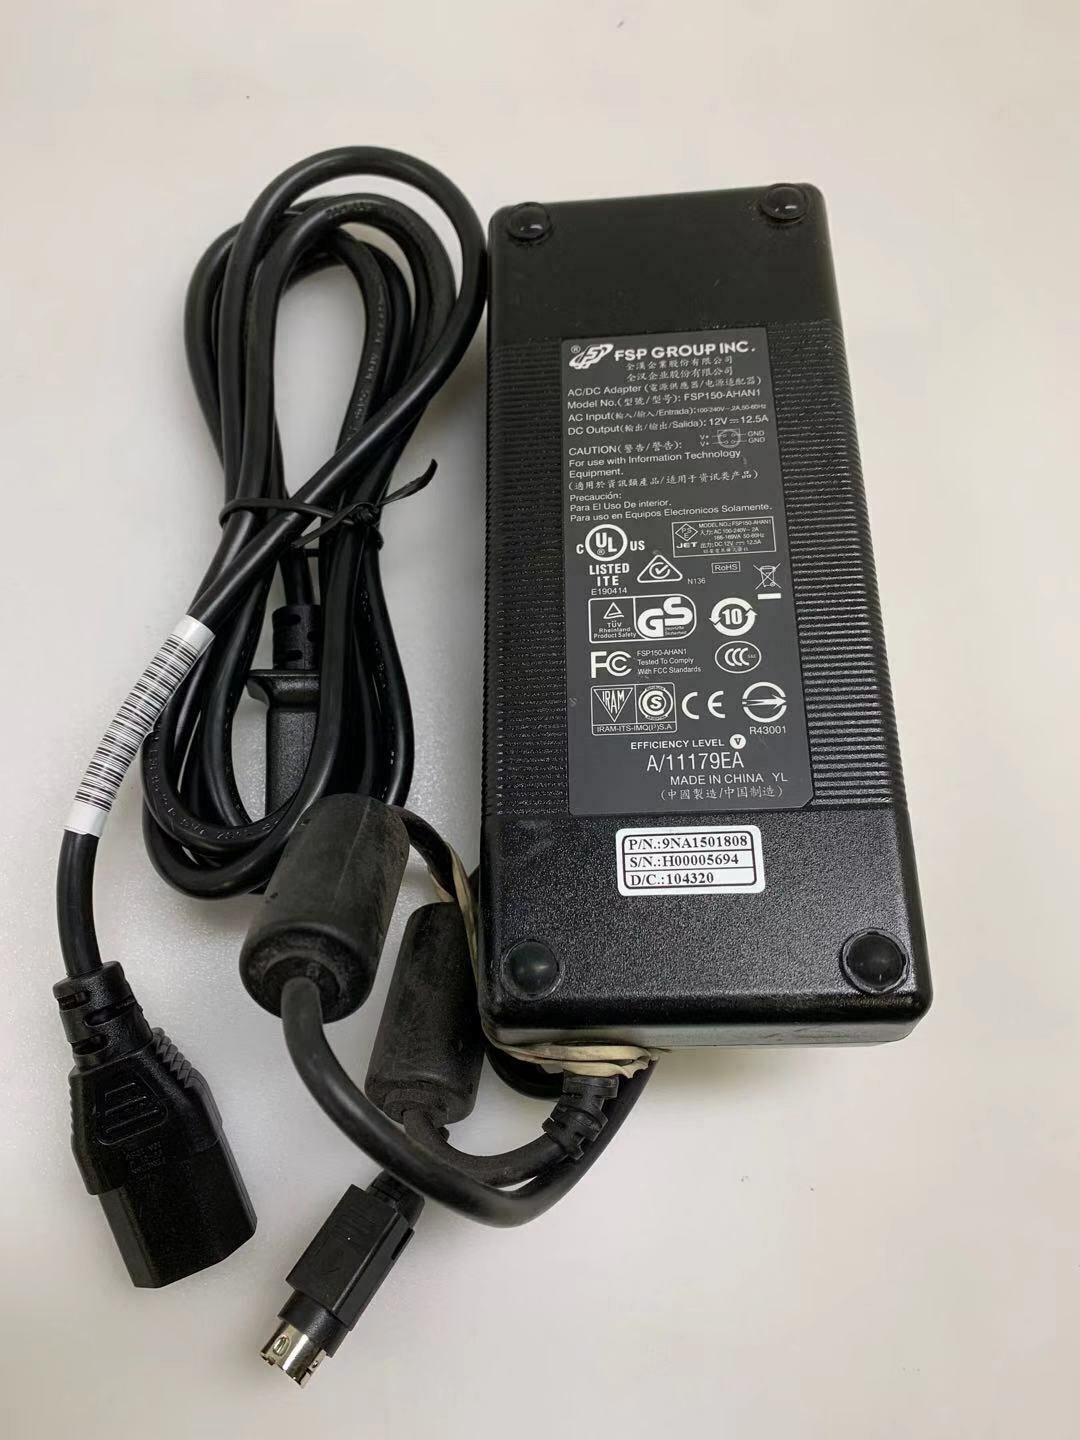 Original FSP Power Supply AC/DC Adapter FSP150-AHAN1 12V 12.5A 4-PIN Connection Split/Duplication: 1:1 Connector A: 4